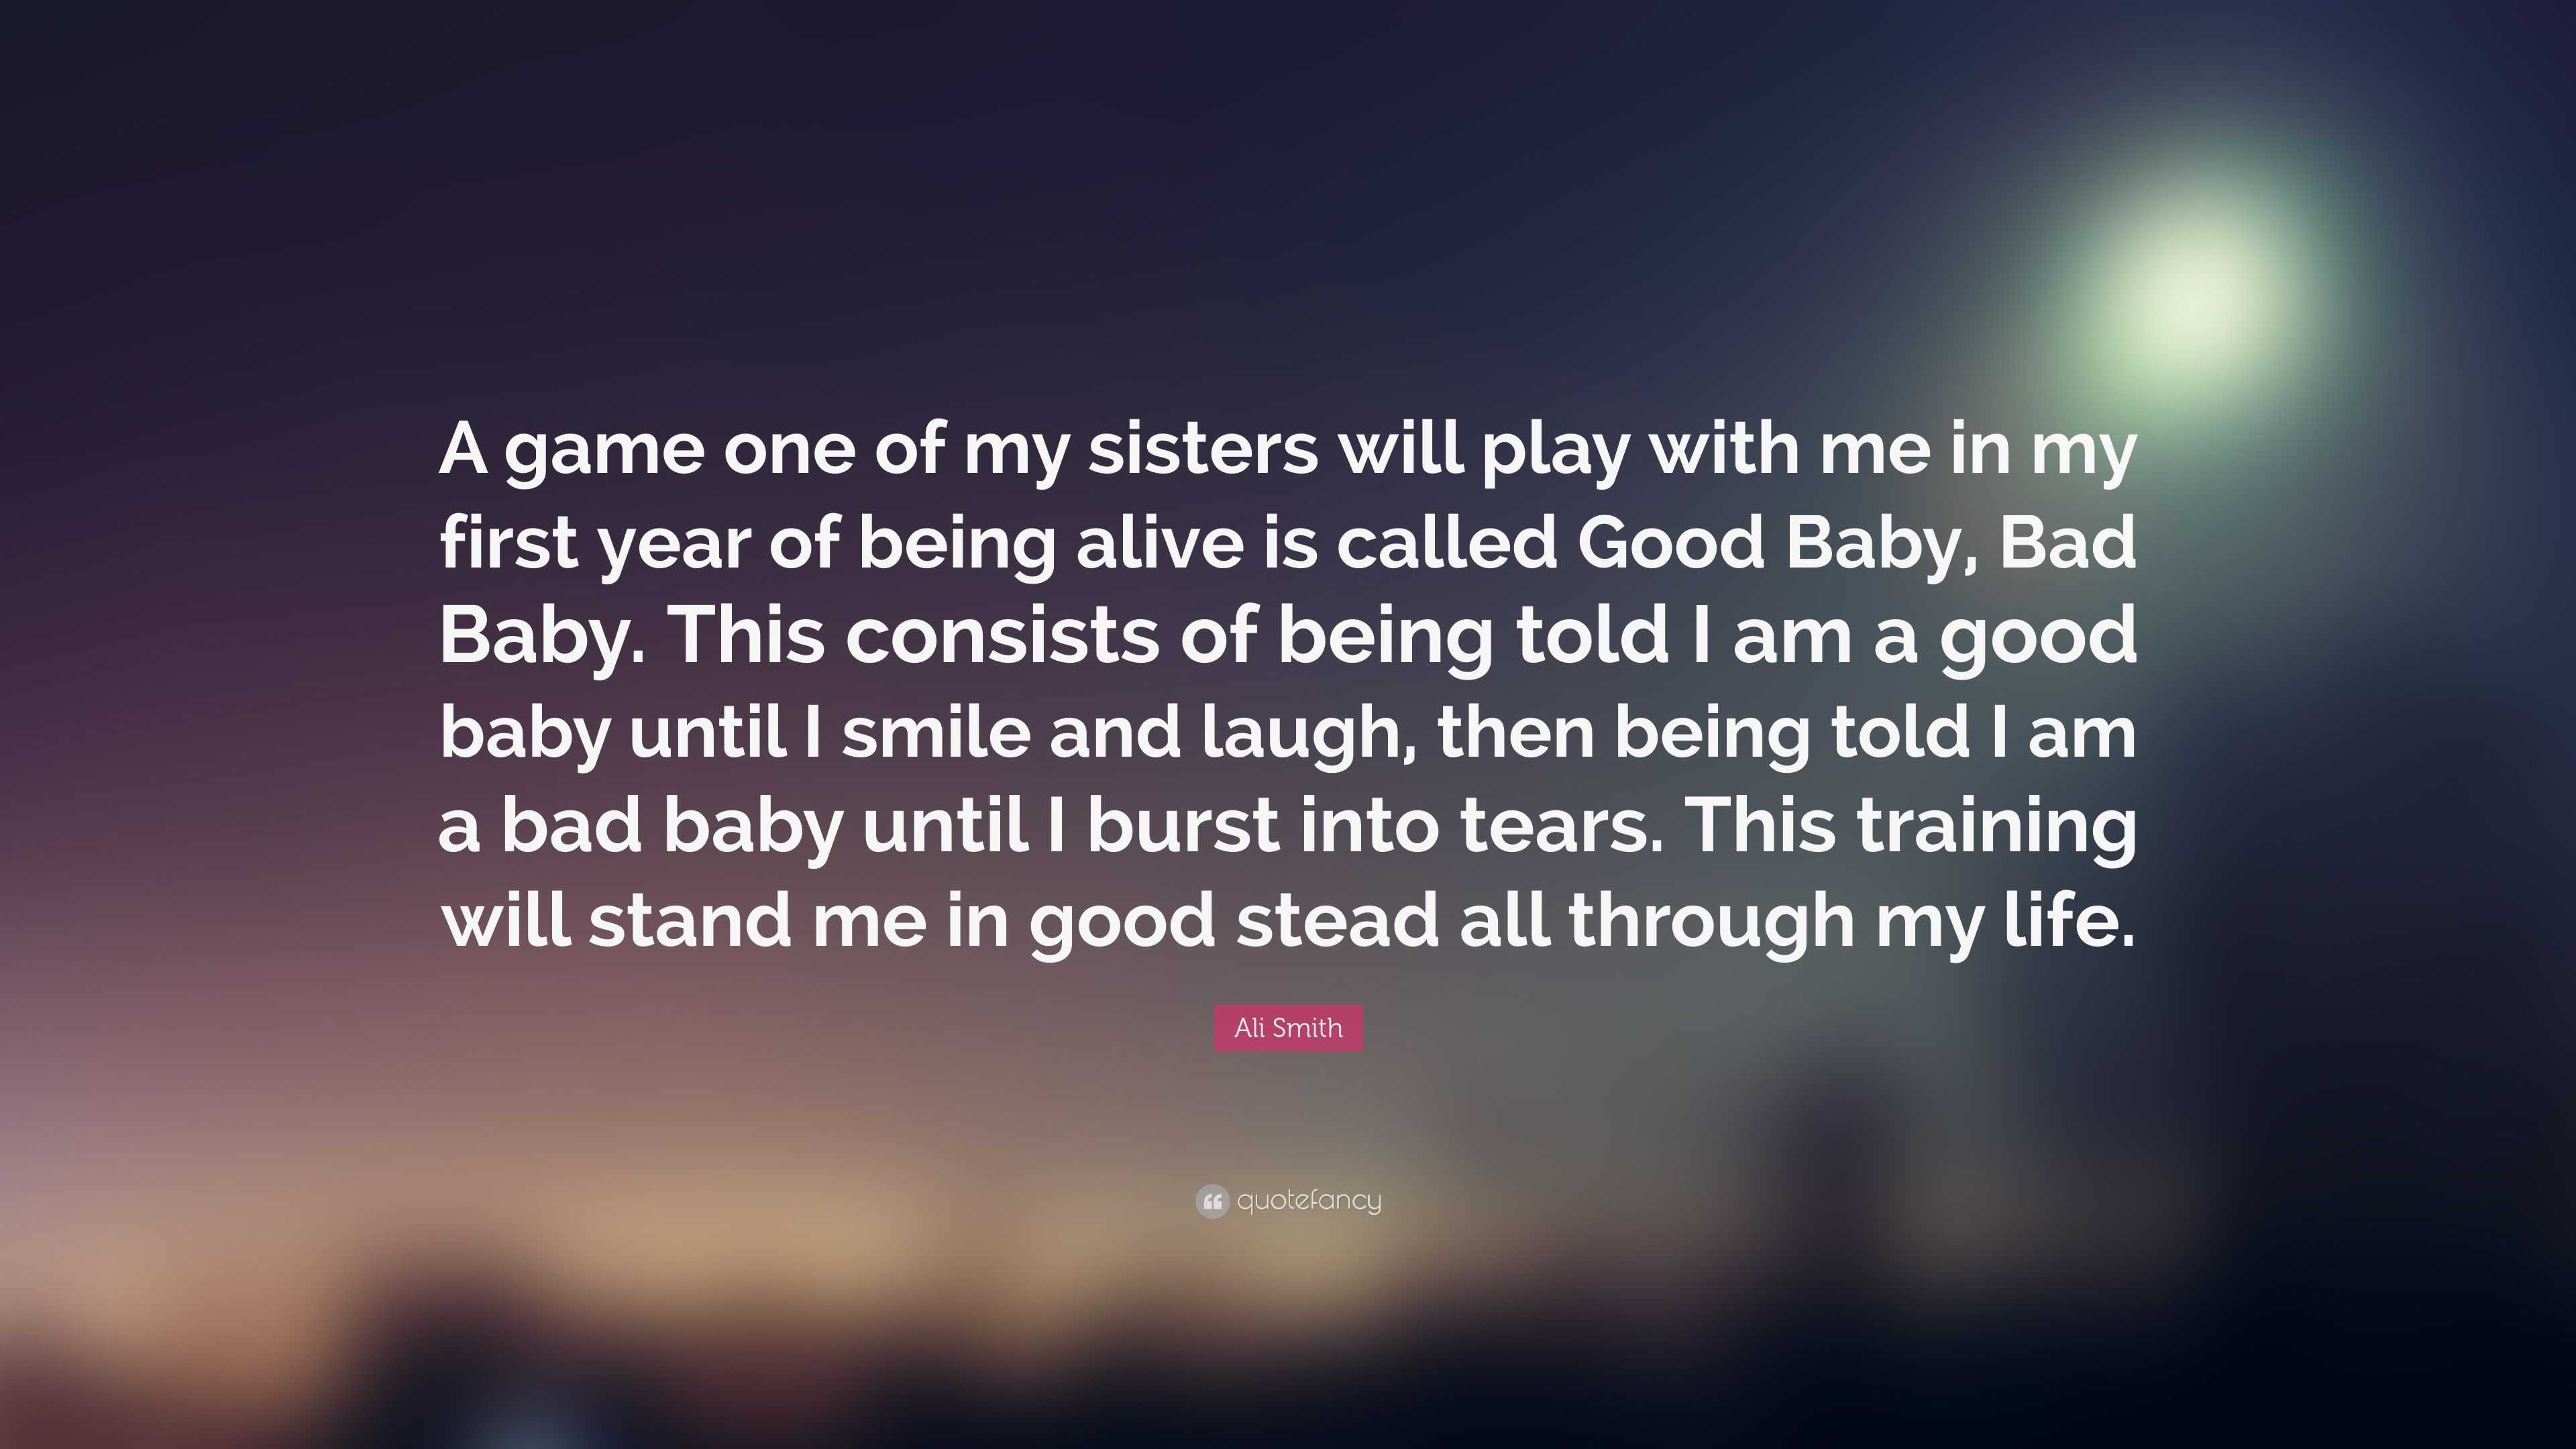 Ali Smith Quote: “A game one of my sisters will play with me in my